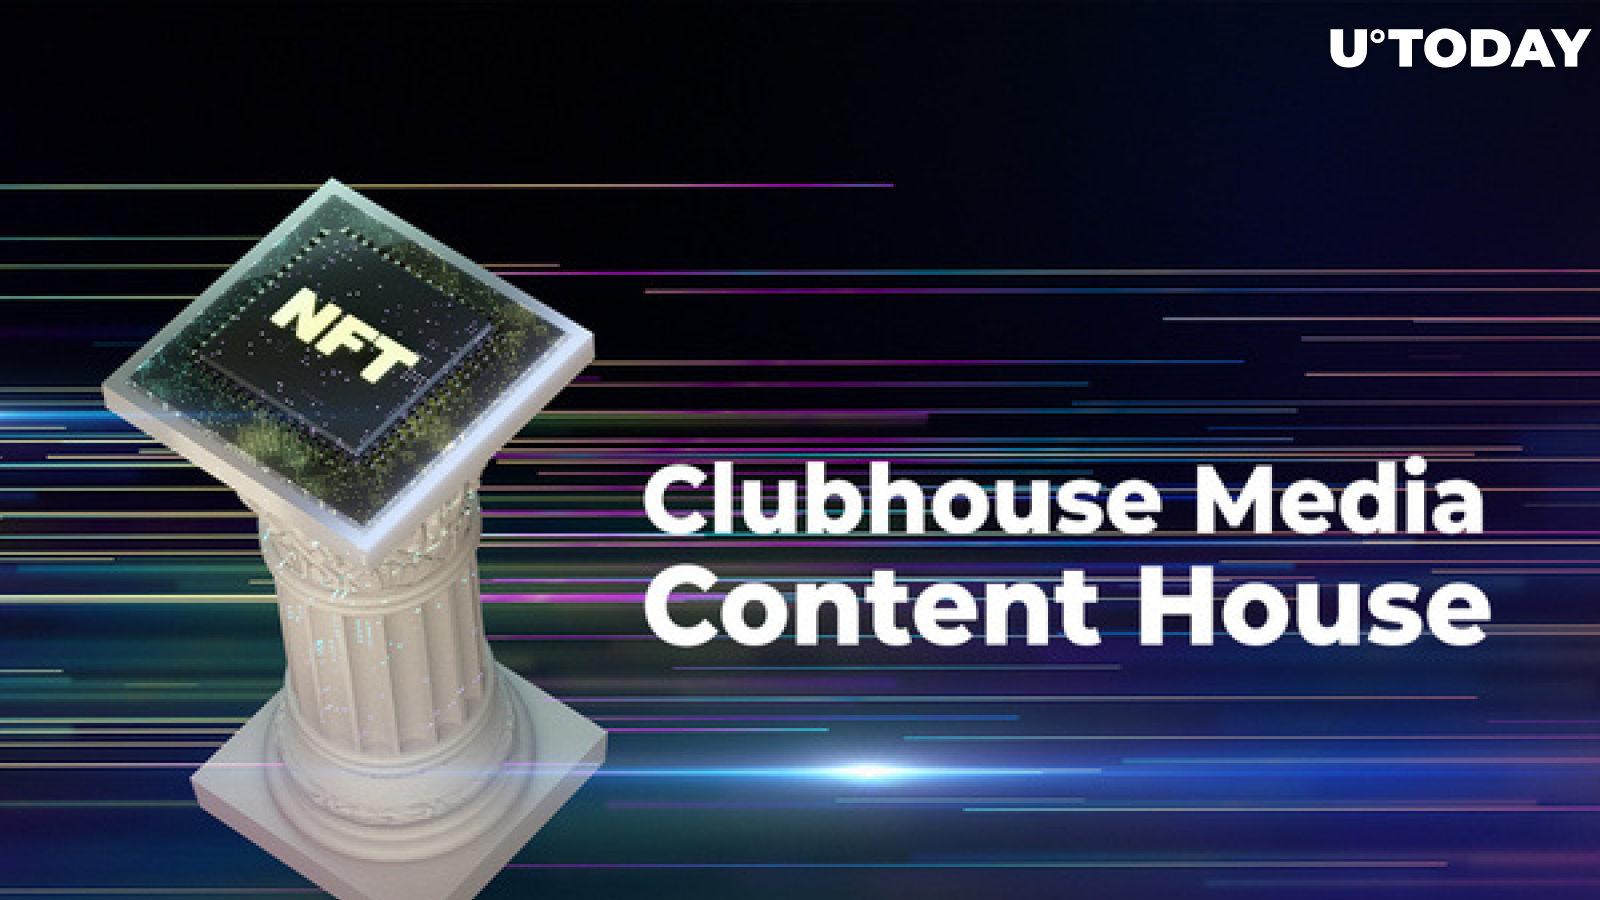 Clubhouse Media Launches New Content House for Tokenized Digital Art and NFT Sales